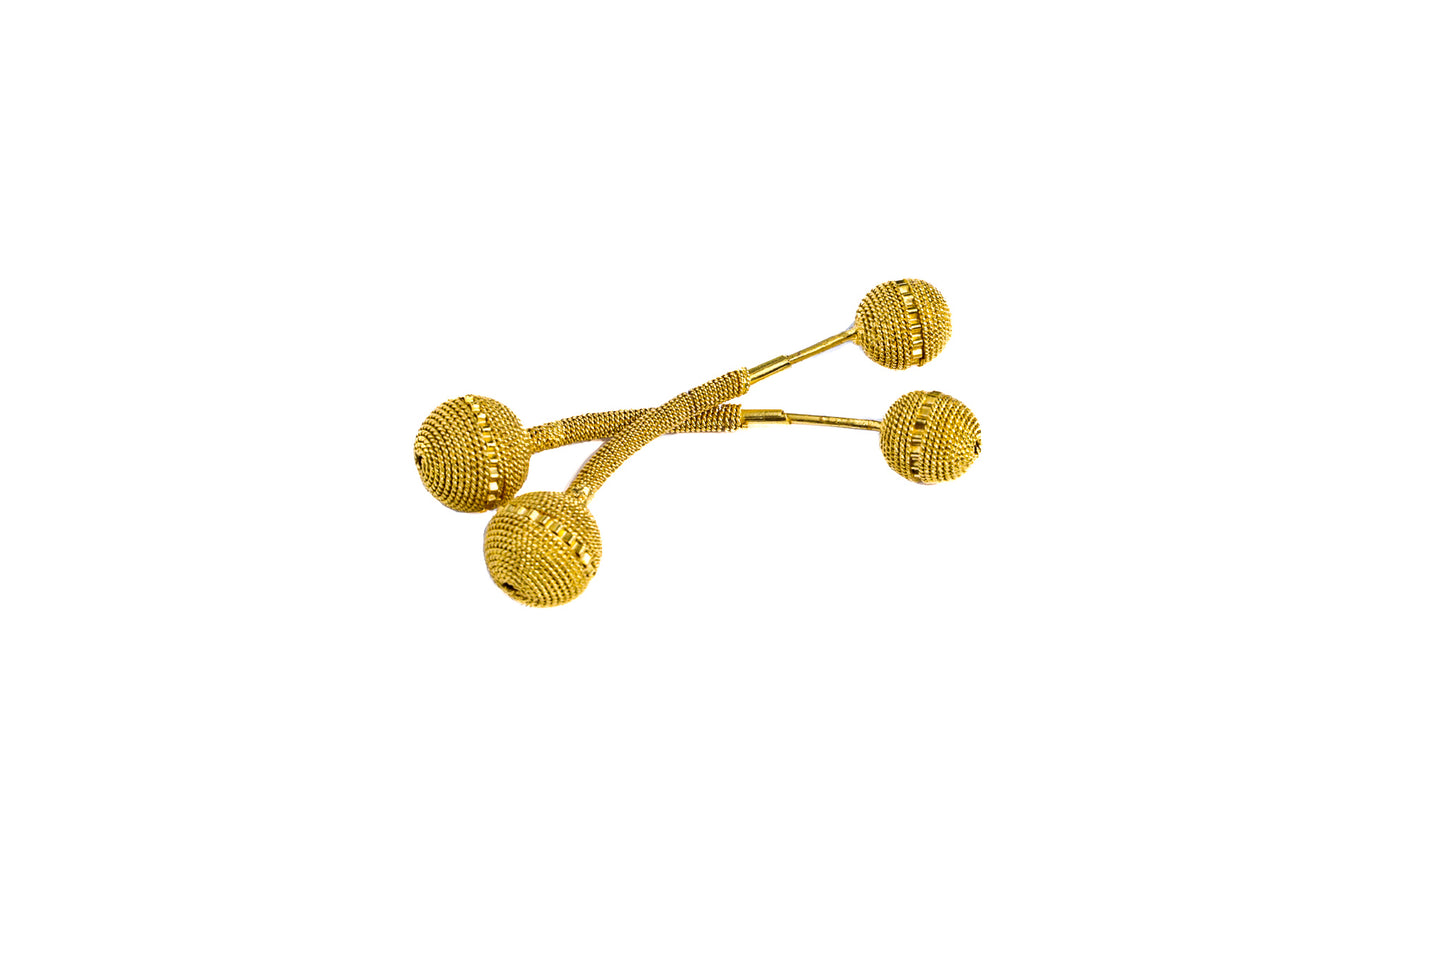 Space Connection 24K Gold Vermeil Earrings